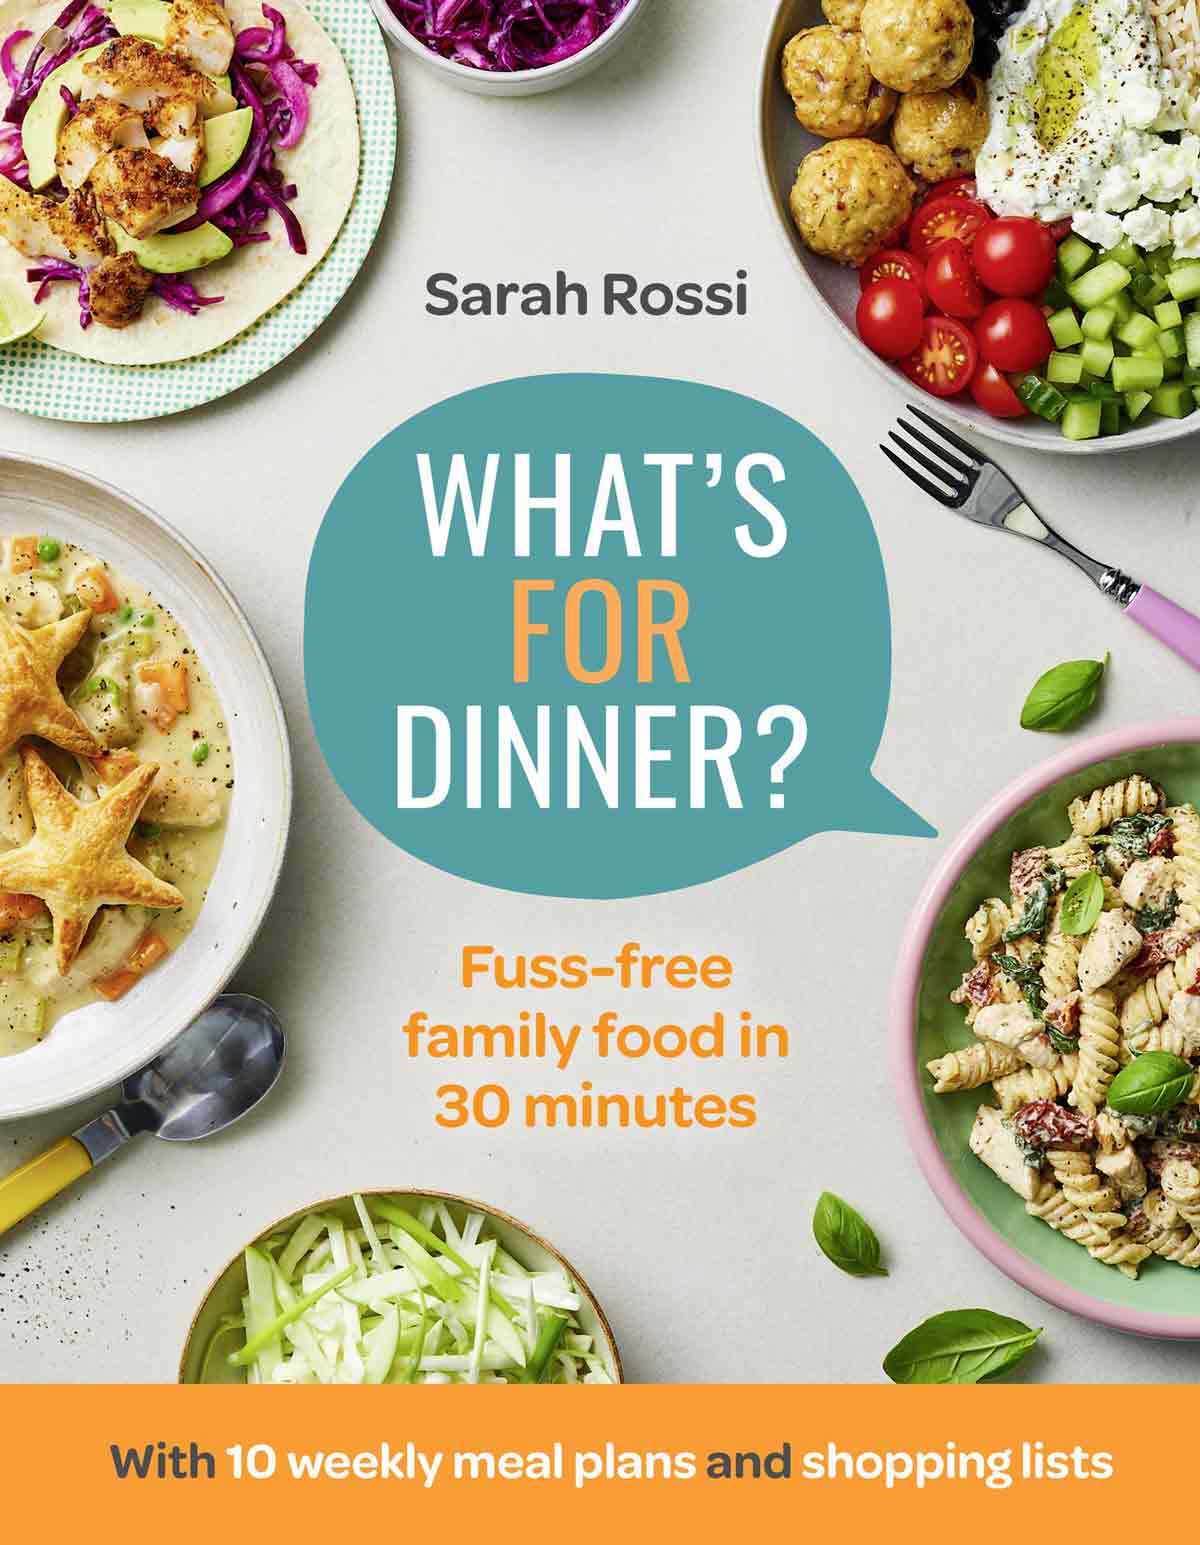 front cover of the book "what's for dinner" by Sarah Rossi